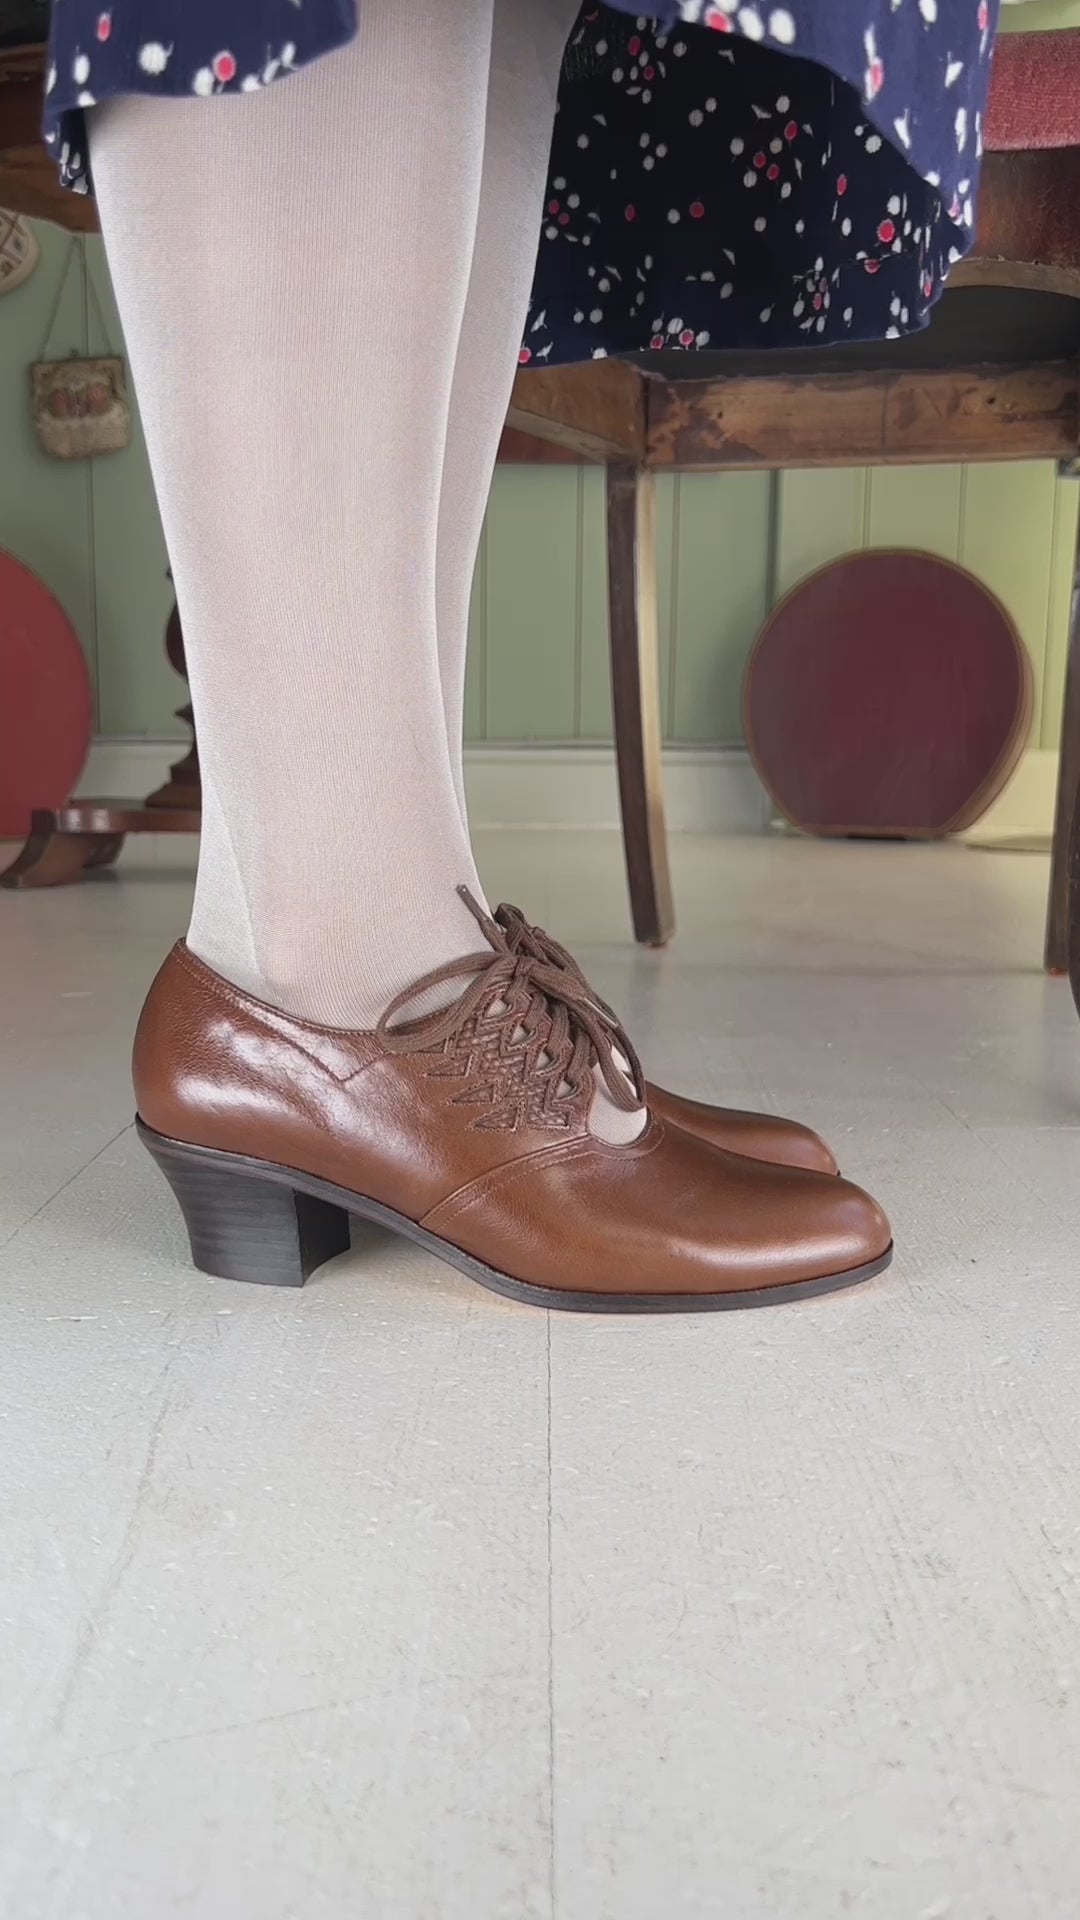 1930s everyday Oxford shoes, brown, Emma